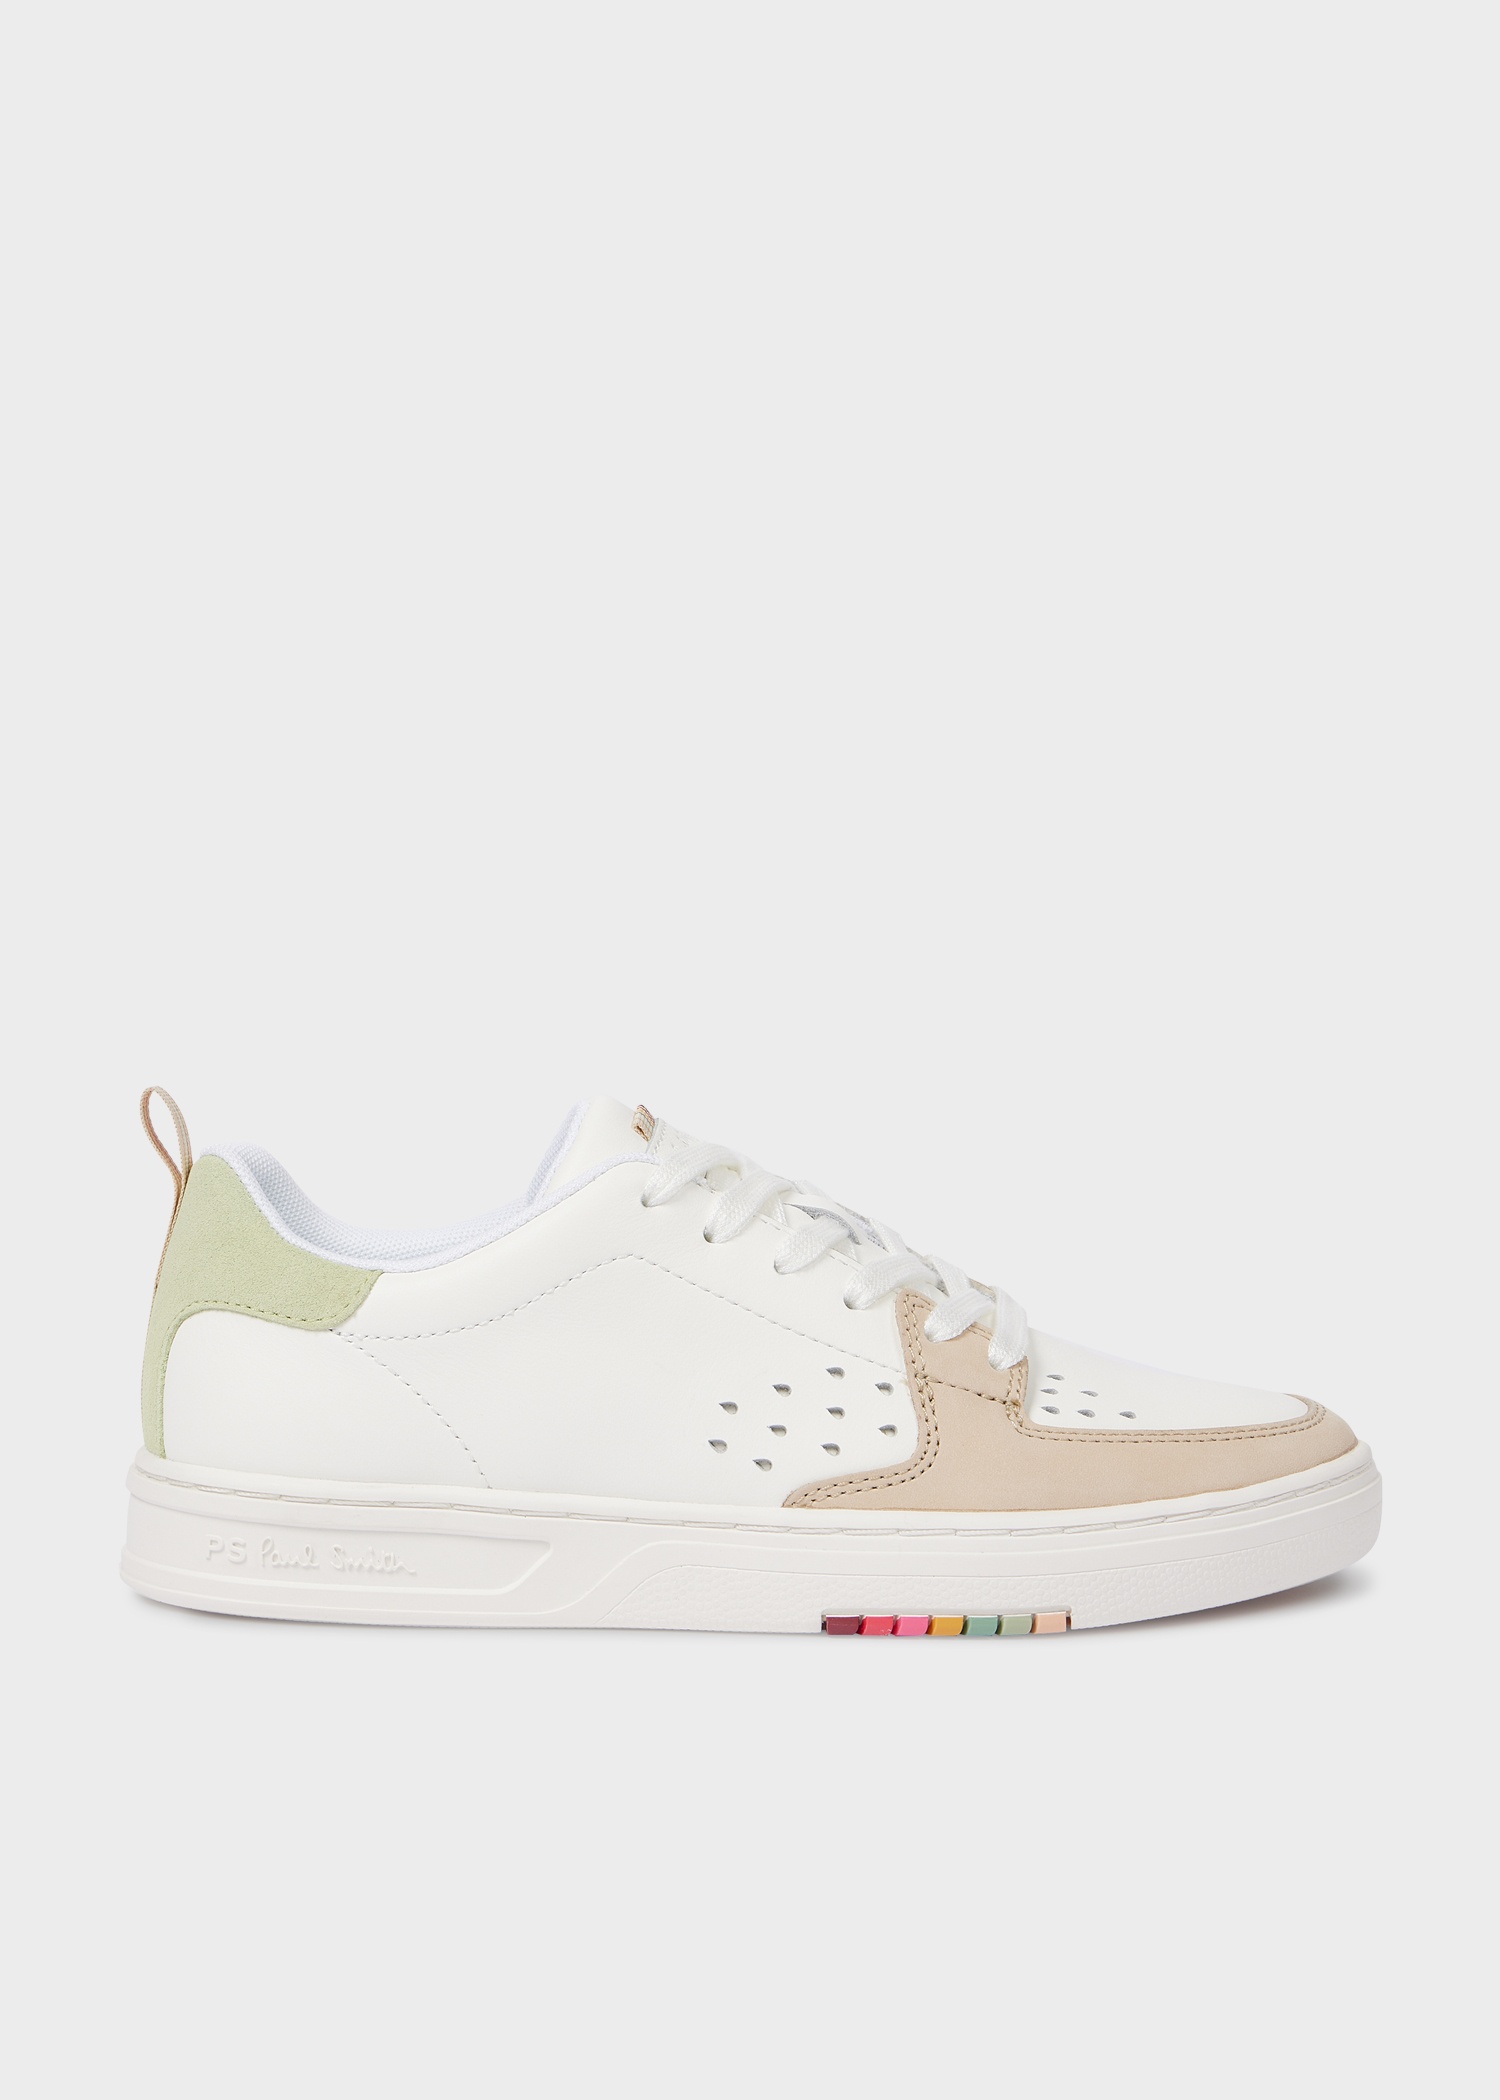 Women's White Contrast-Panel 'Cosmo' Trainers - 1